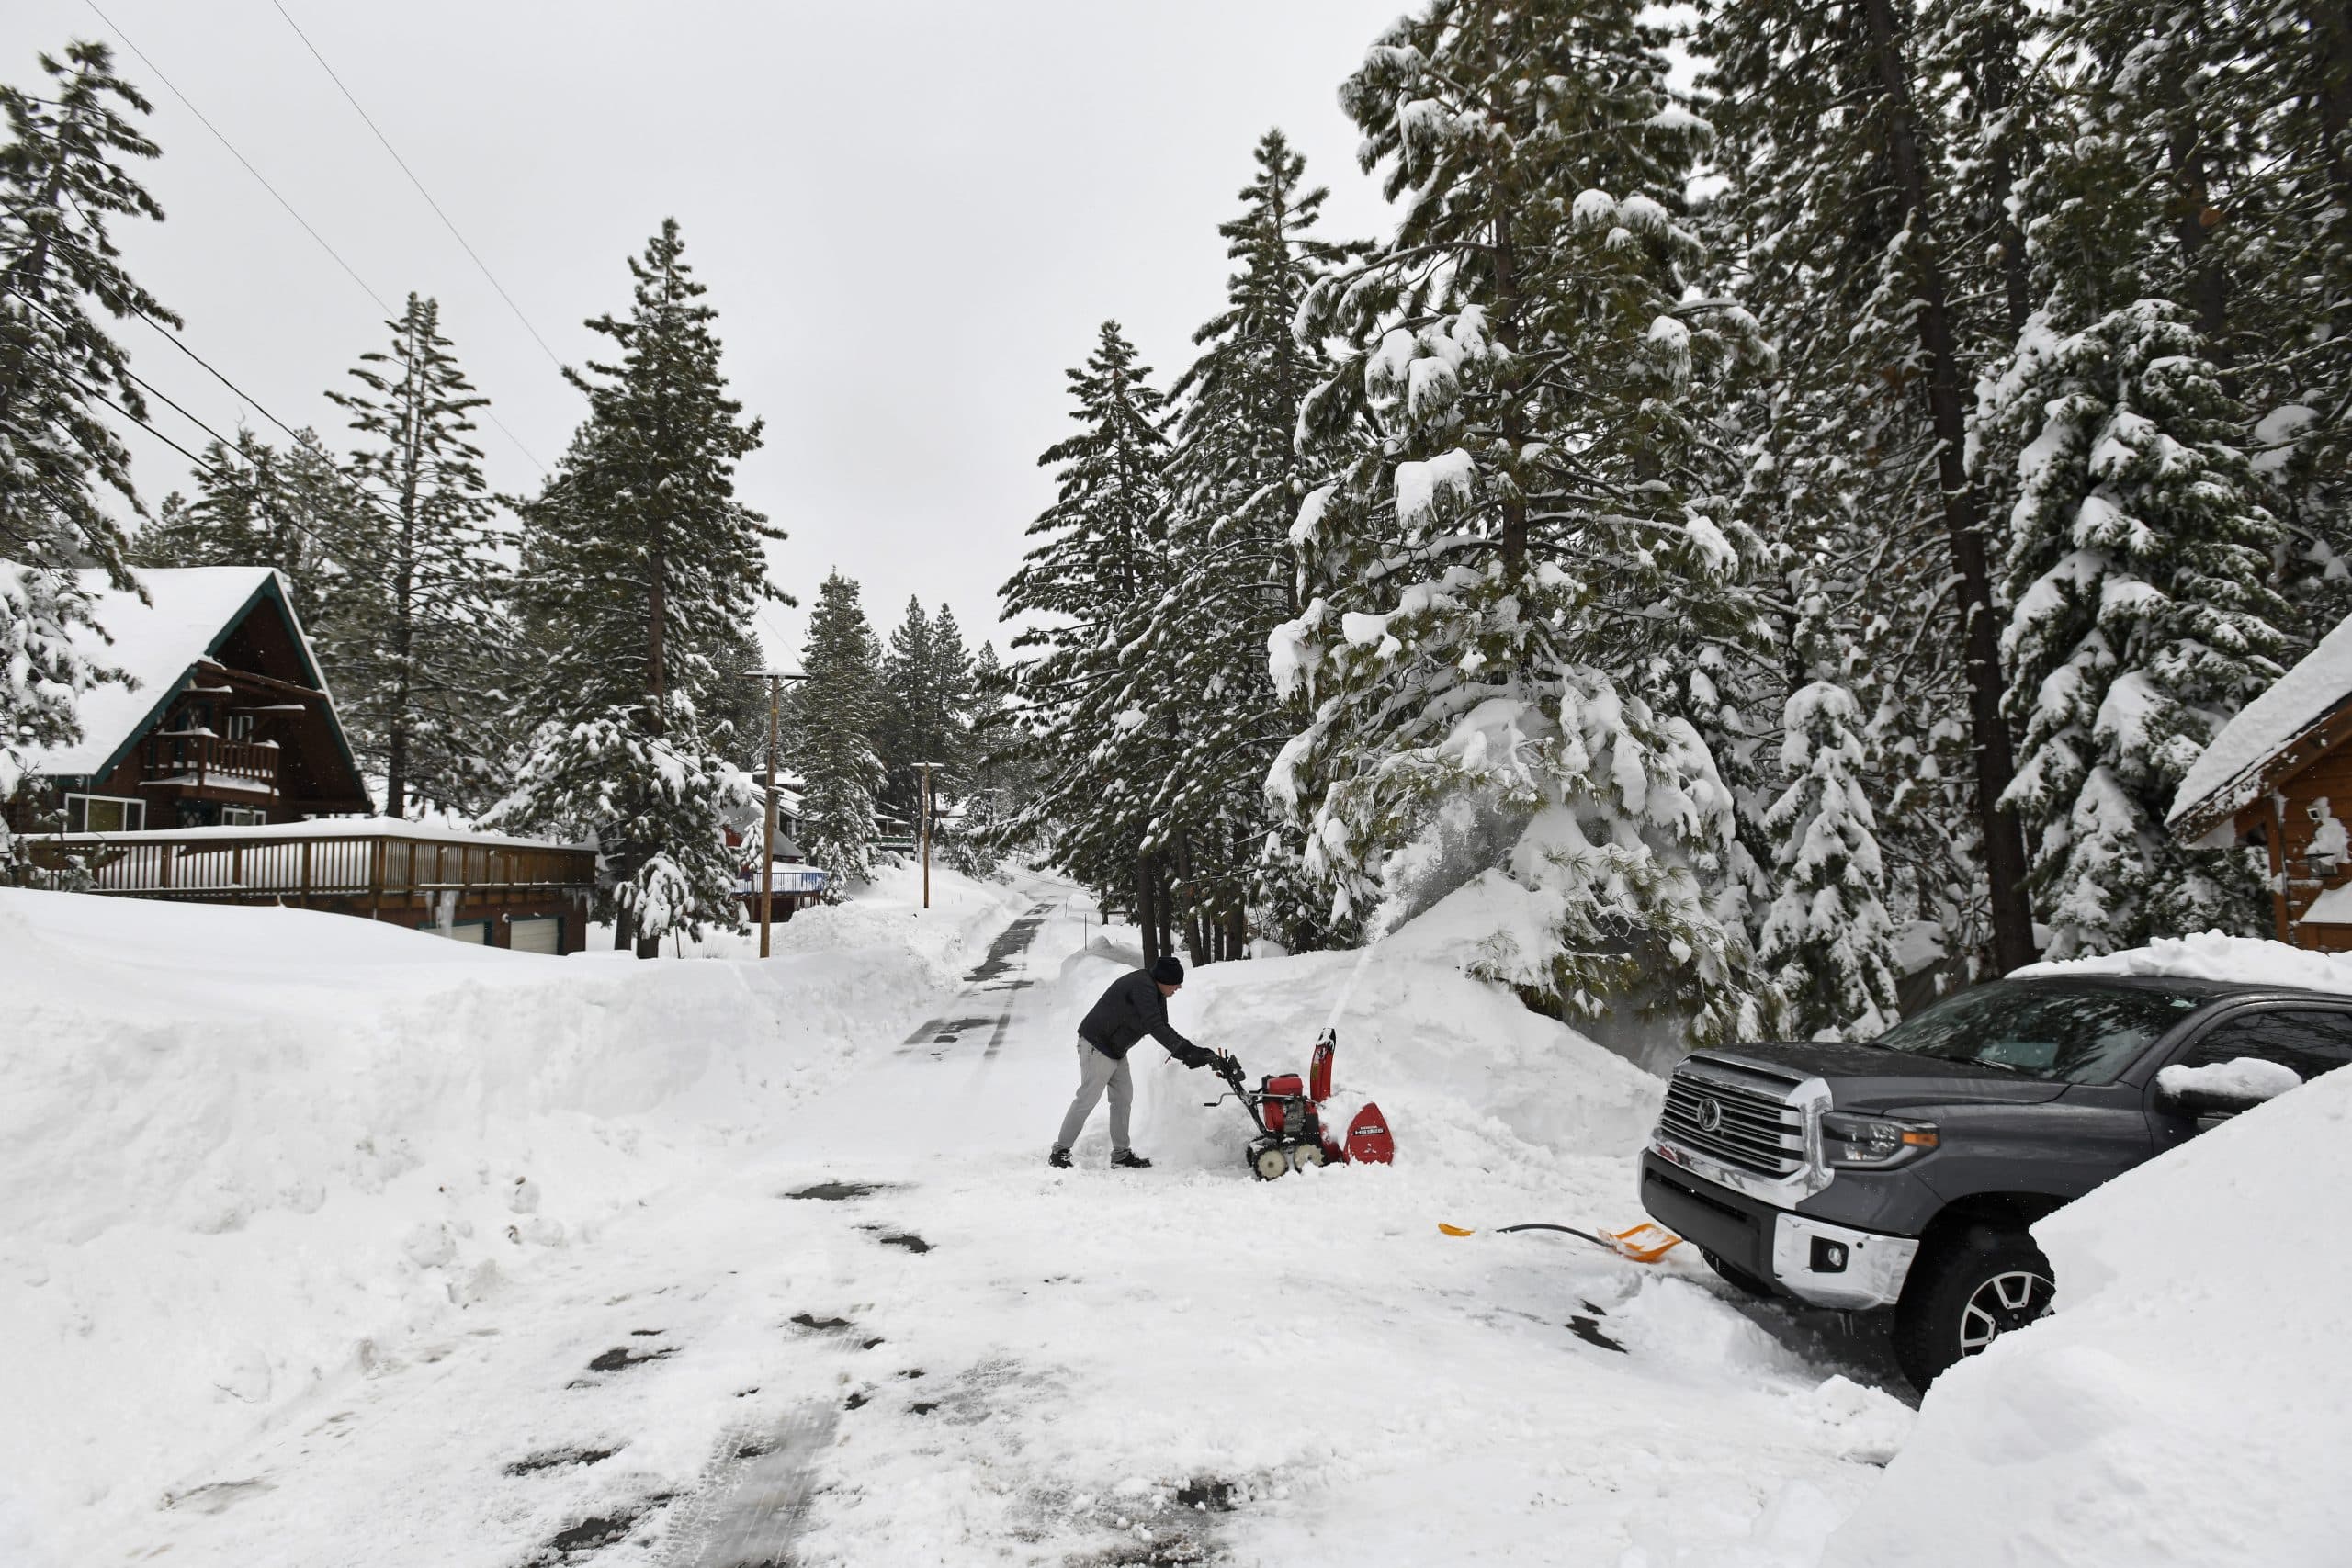 California ski resort workers tunnel their way into the office after